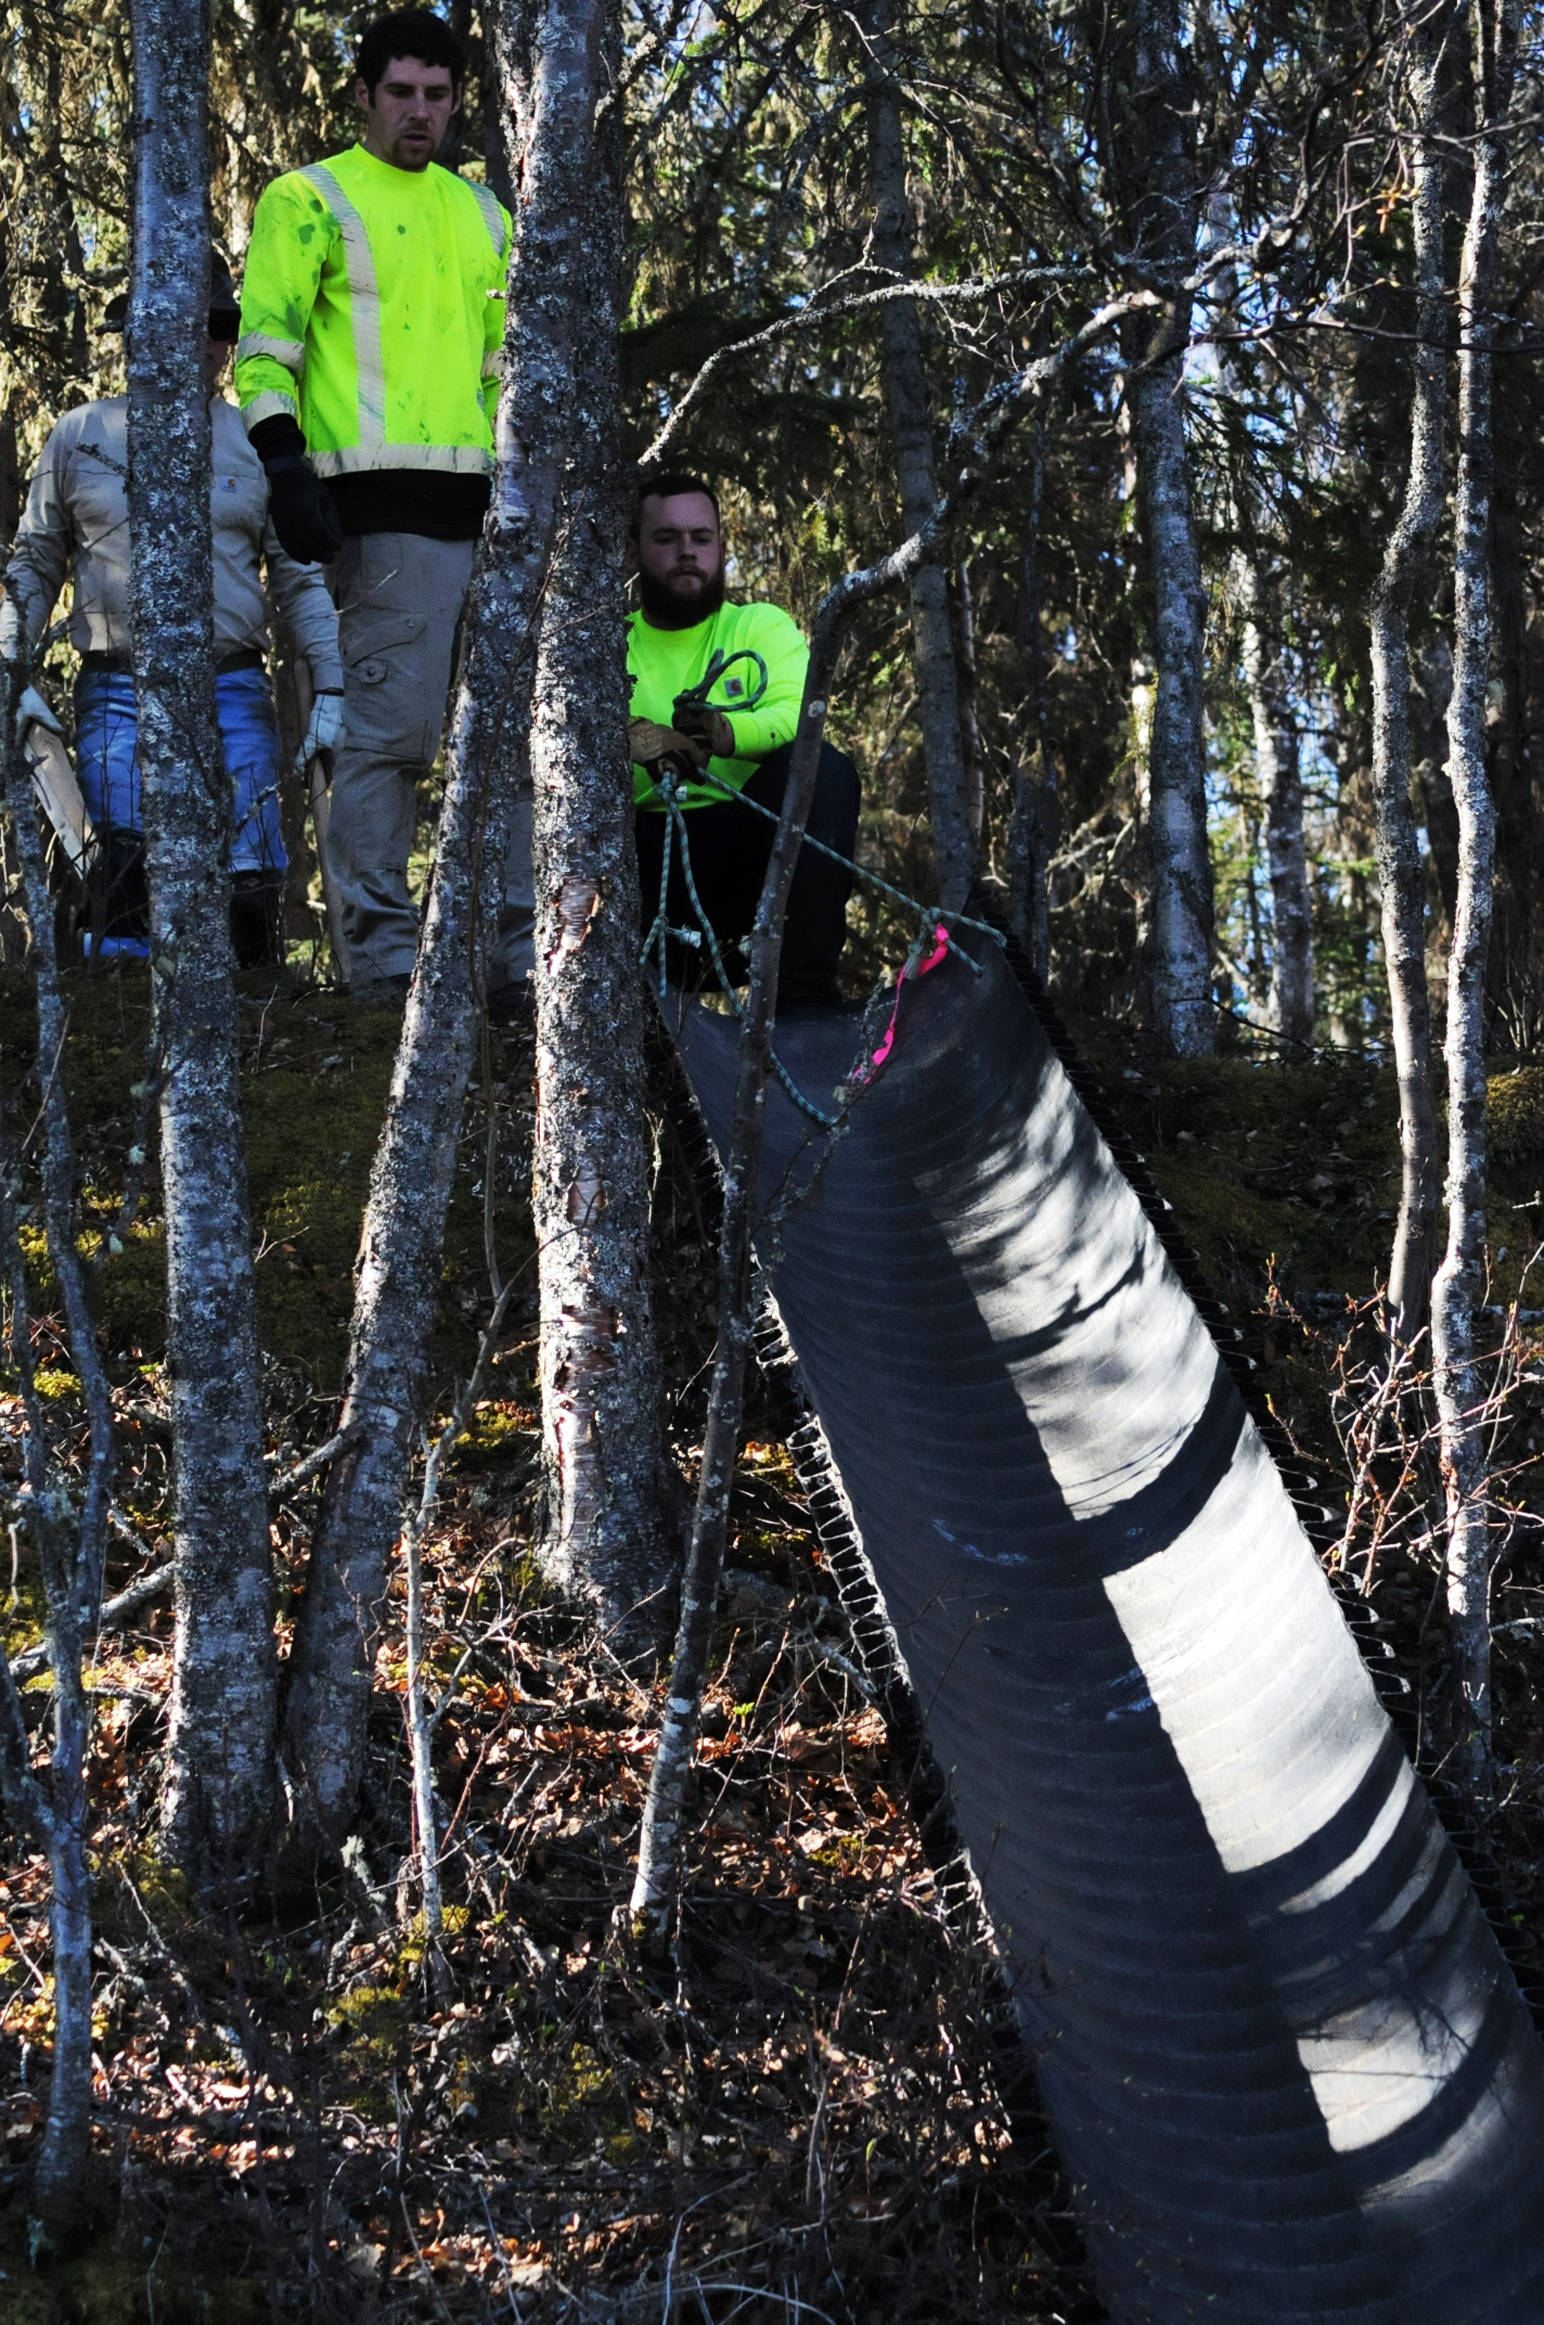 Alaska Department of Fish and Game staff arrange a chute to pour dirt down during streambank restoration work as part of a workshop at the Donald E. Gilman River Center on Wednesday, May 10, 2017 in Soldotna, Alaska. The free two-day annual workshop, hosted by Fish and Game, teaches people how to properly restore damaged fish habitat along streams in Alaska. (Elizabeth Earl/Peninsula Clarion)  Alaska Department of Fish and Game staff arrange a chute to pour dirt down during streambank restoration work as part of a workshop at the Donald E. Gilman River Center on Wednesday in Soldotna. The free two-day annual workshop, hosted by Fish and Game, teaches people how to properly restore damaged fish habitat along streams in Alaska. (Elizabeth Earl/Peninsula Clarion)